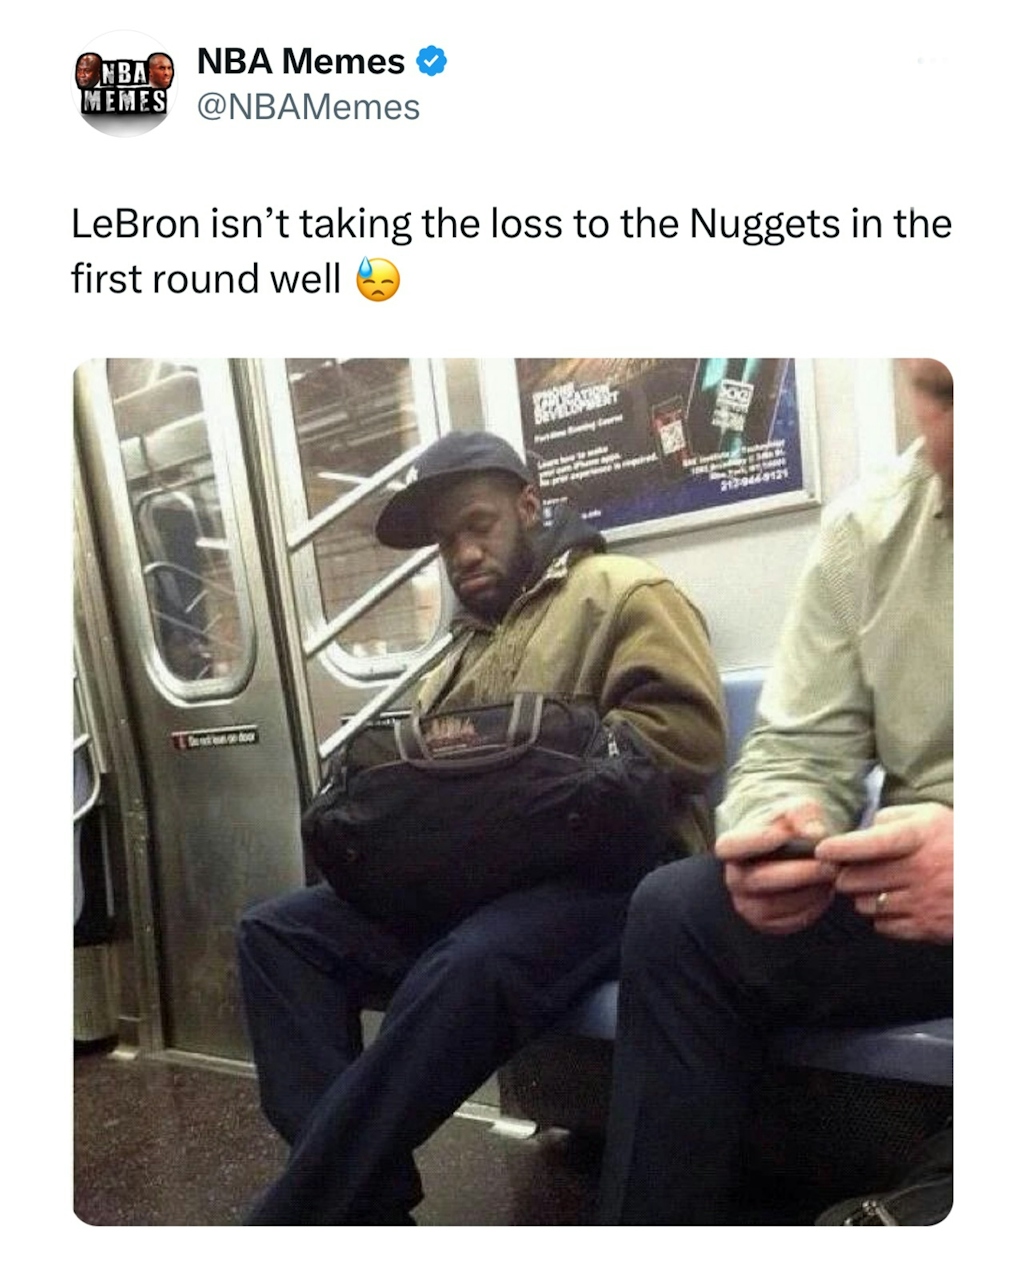 LeBron is going through it 💔